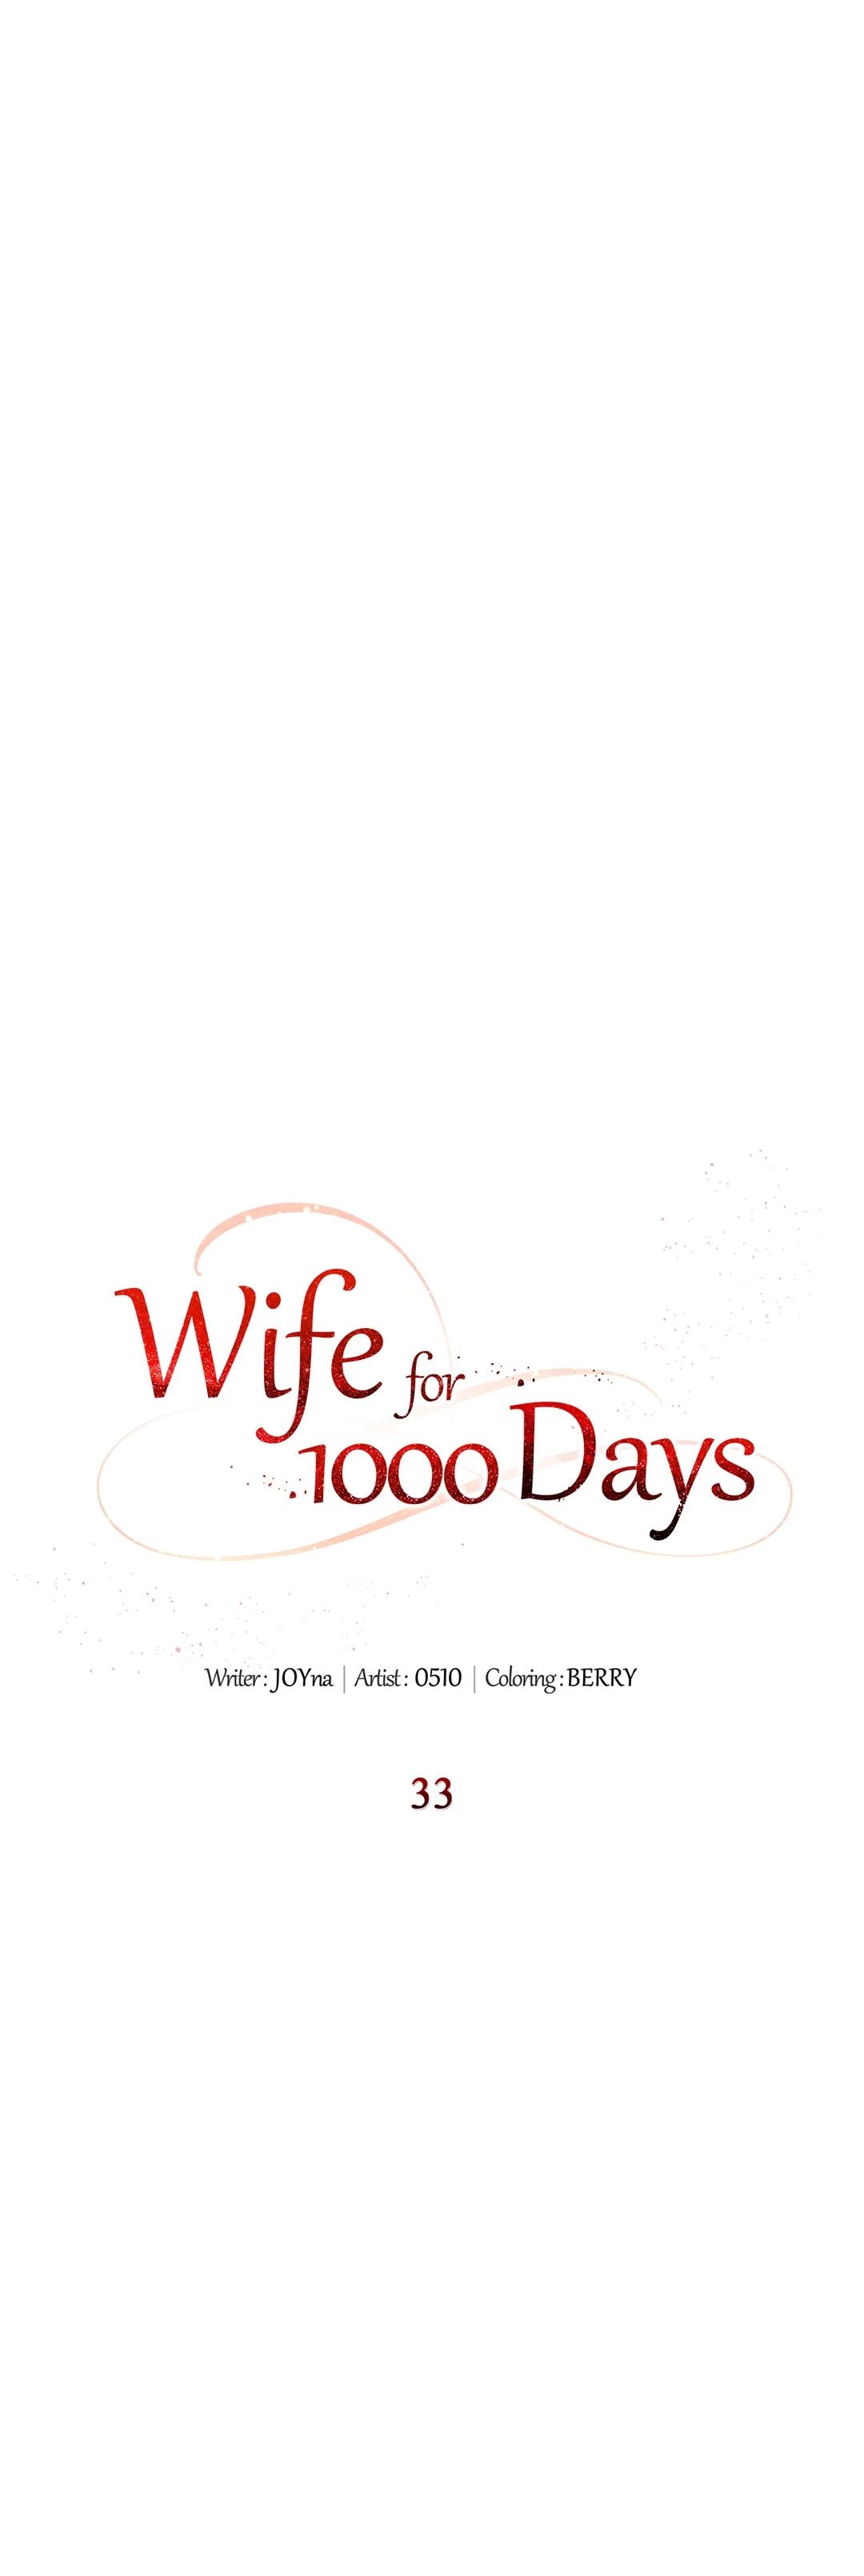 Wife for 1000 Days image